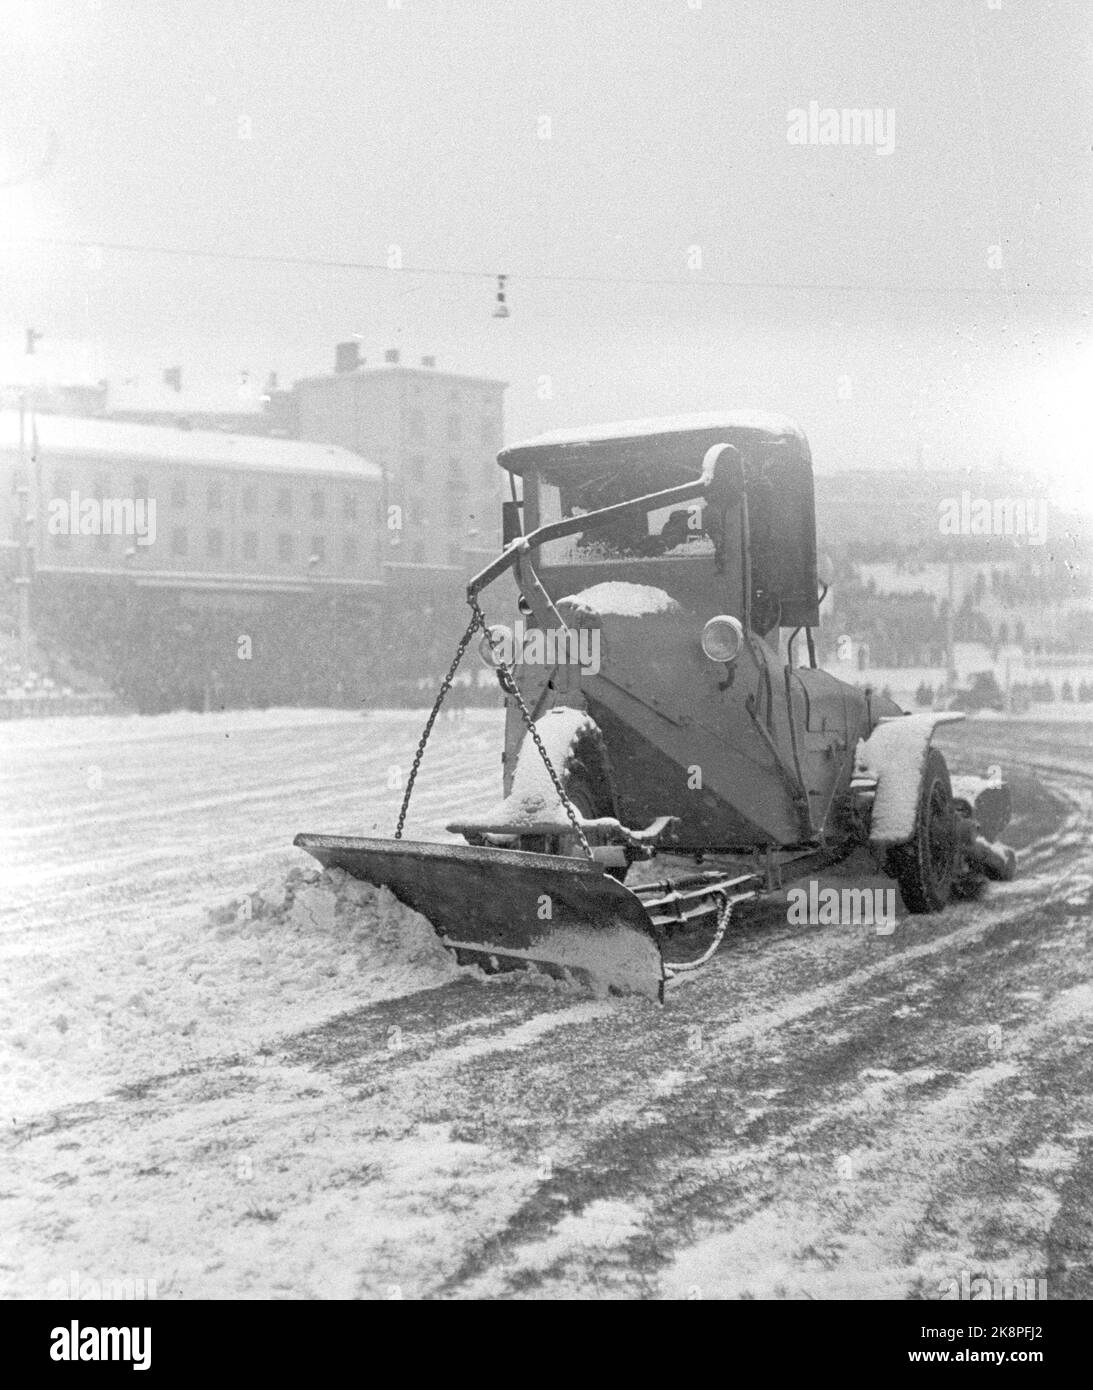 Oslo 19471109 Dynamo - Skeid on winter driving Football match between Dynamo - Skeid 7-0, at Bislett. Snow on the track must be gulled away. The snow plows are clearing the space. Photo; Current / NTB  NB: Photo Not image treated. Stock Photo